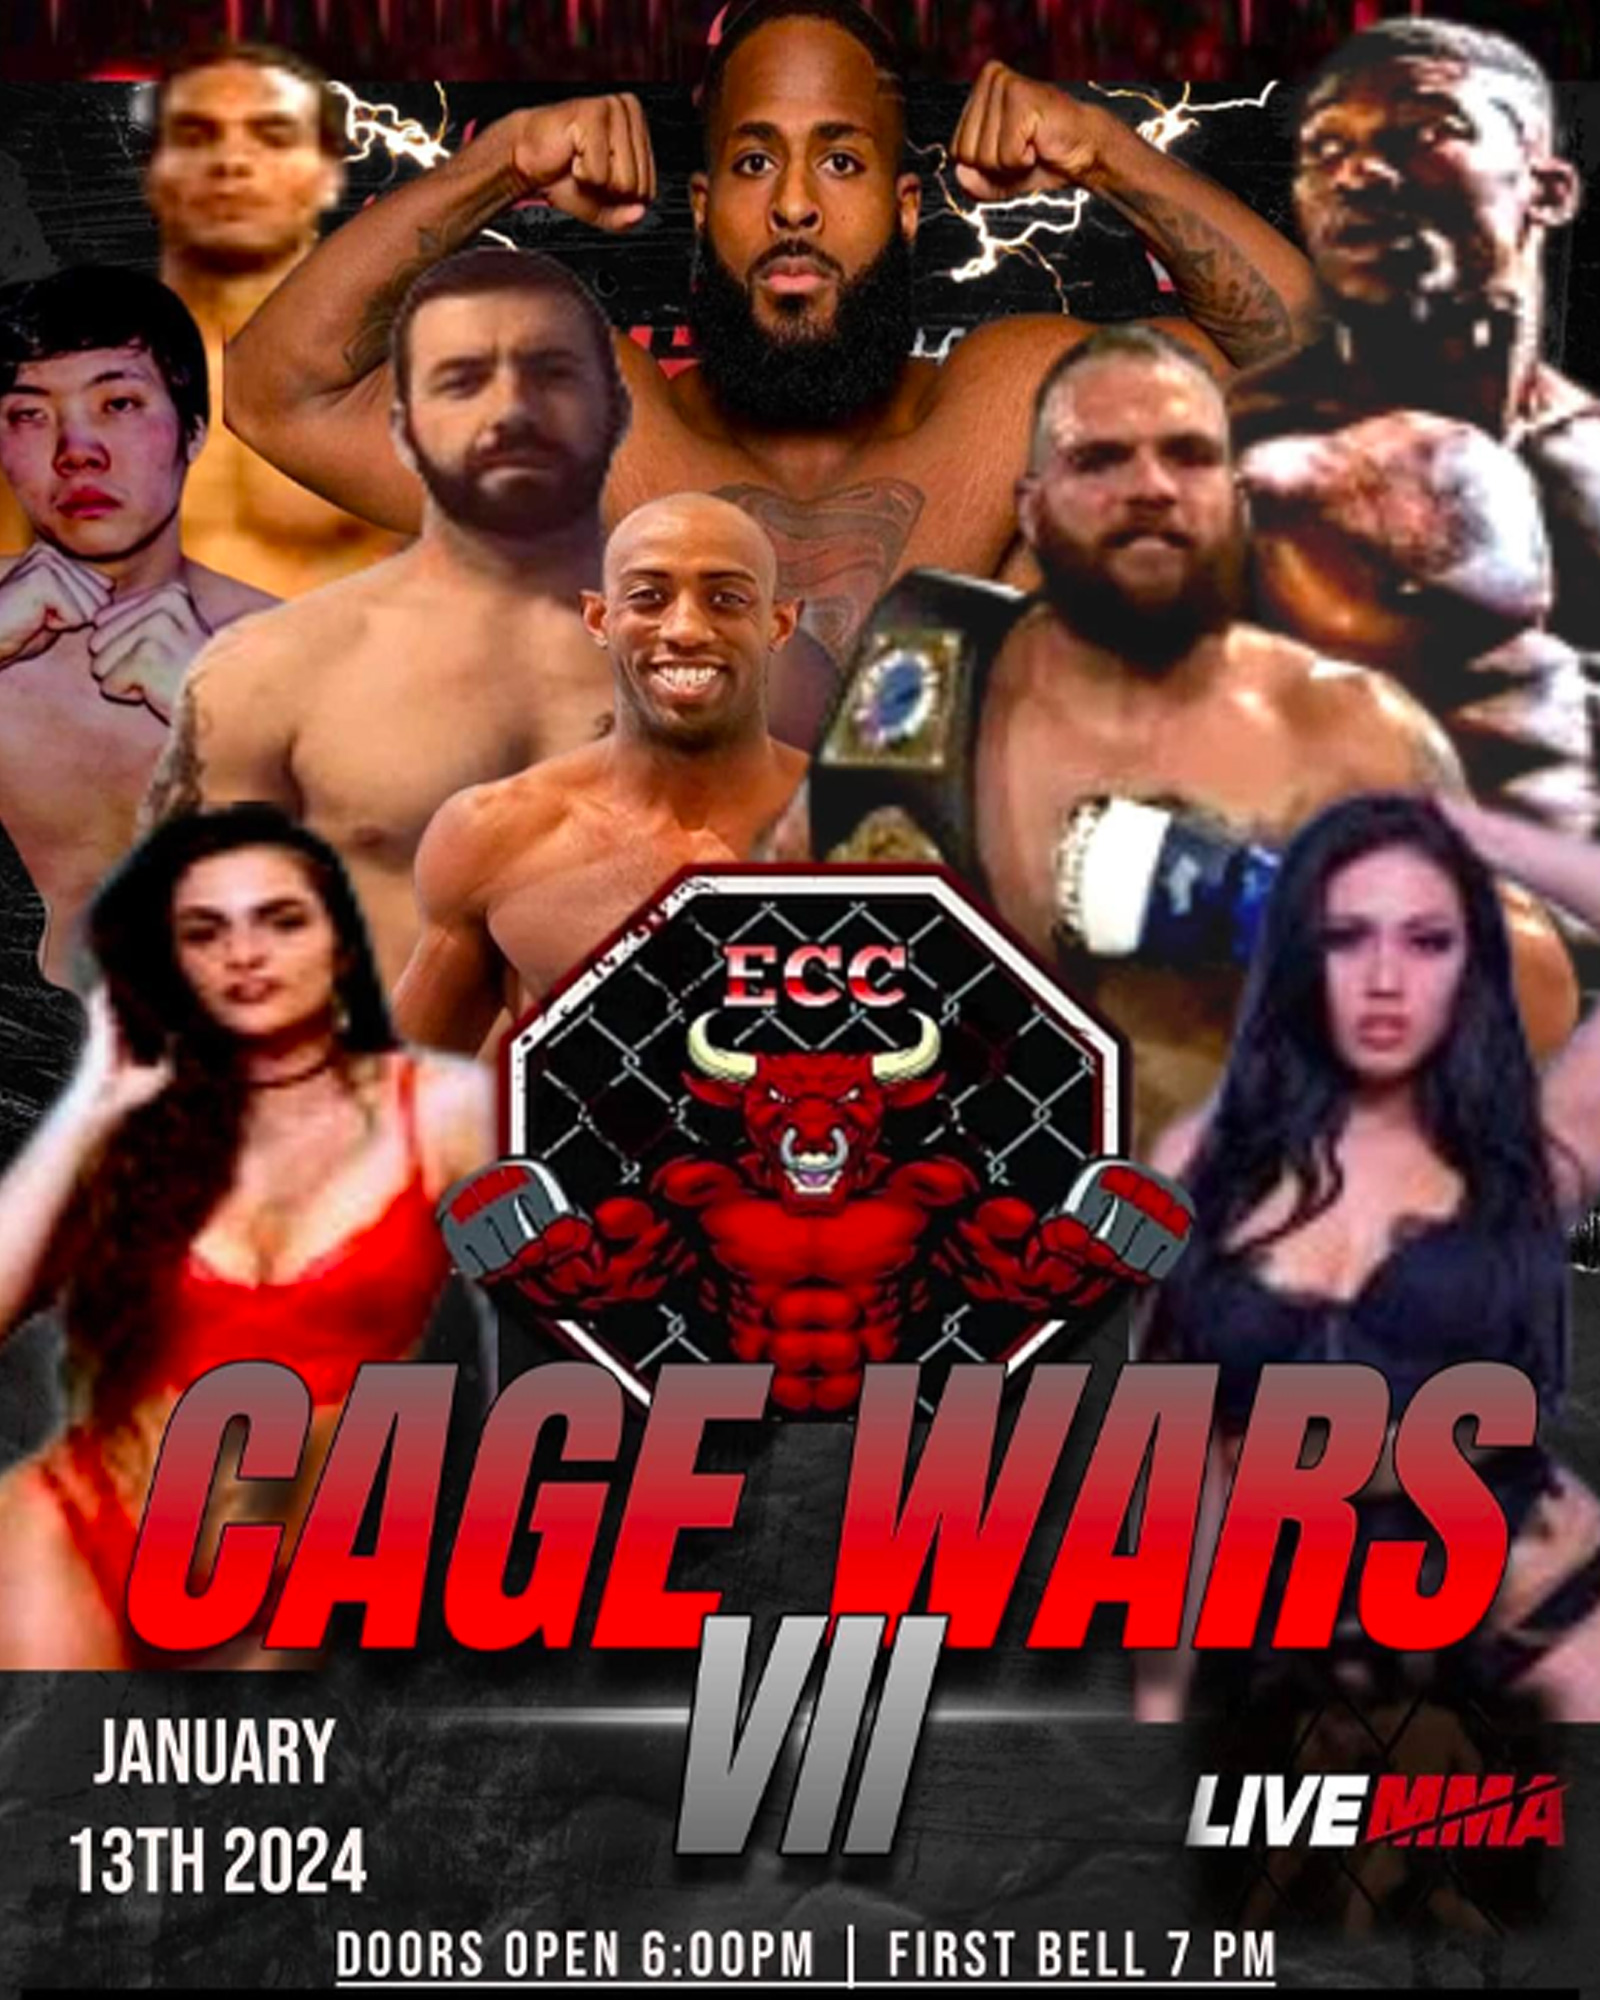 Watch ECC Cage Wars 7 on Combat Sports Now